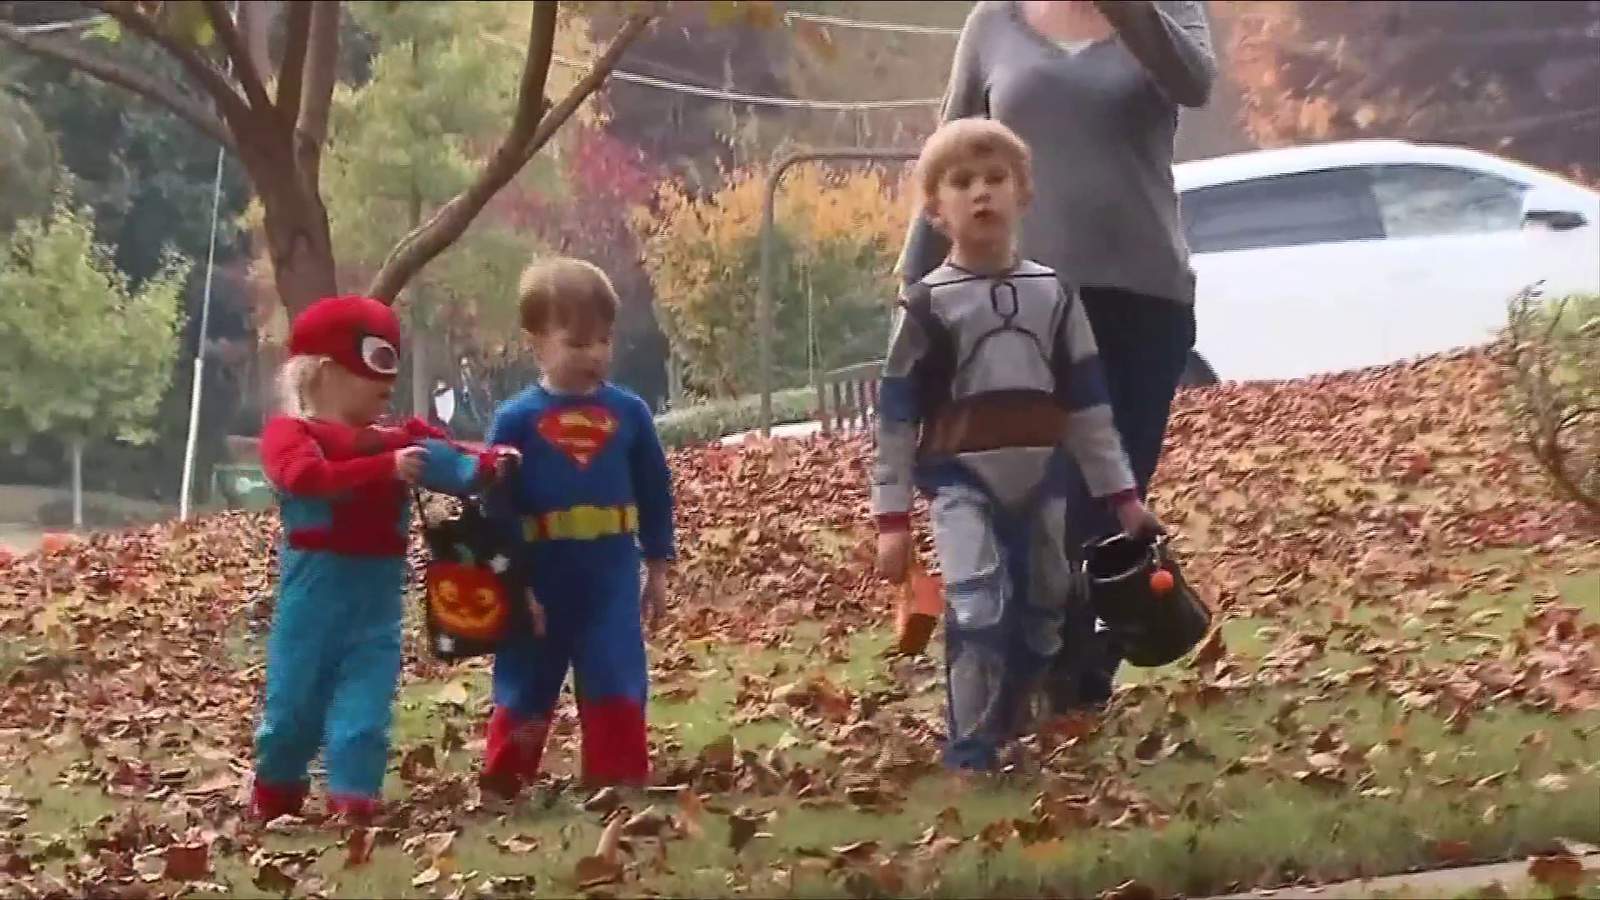 People thinking on alternate plans as CDC classifies trick-or-treating as ‘high risk’